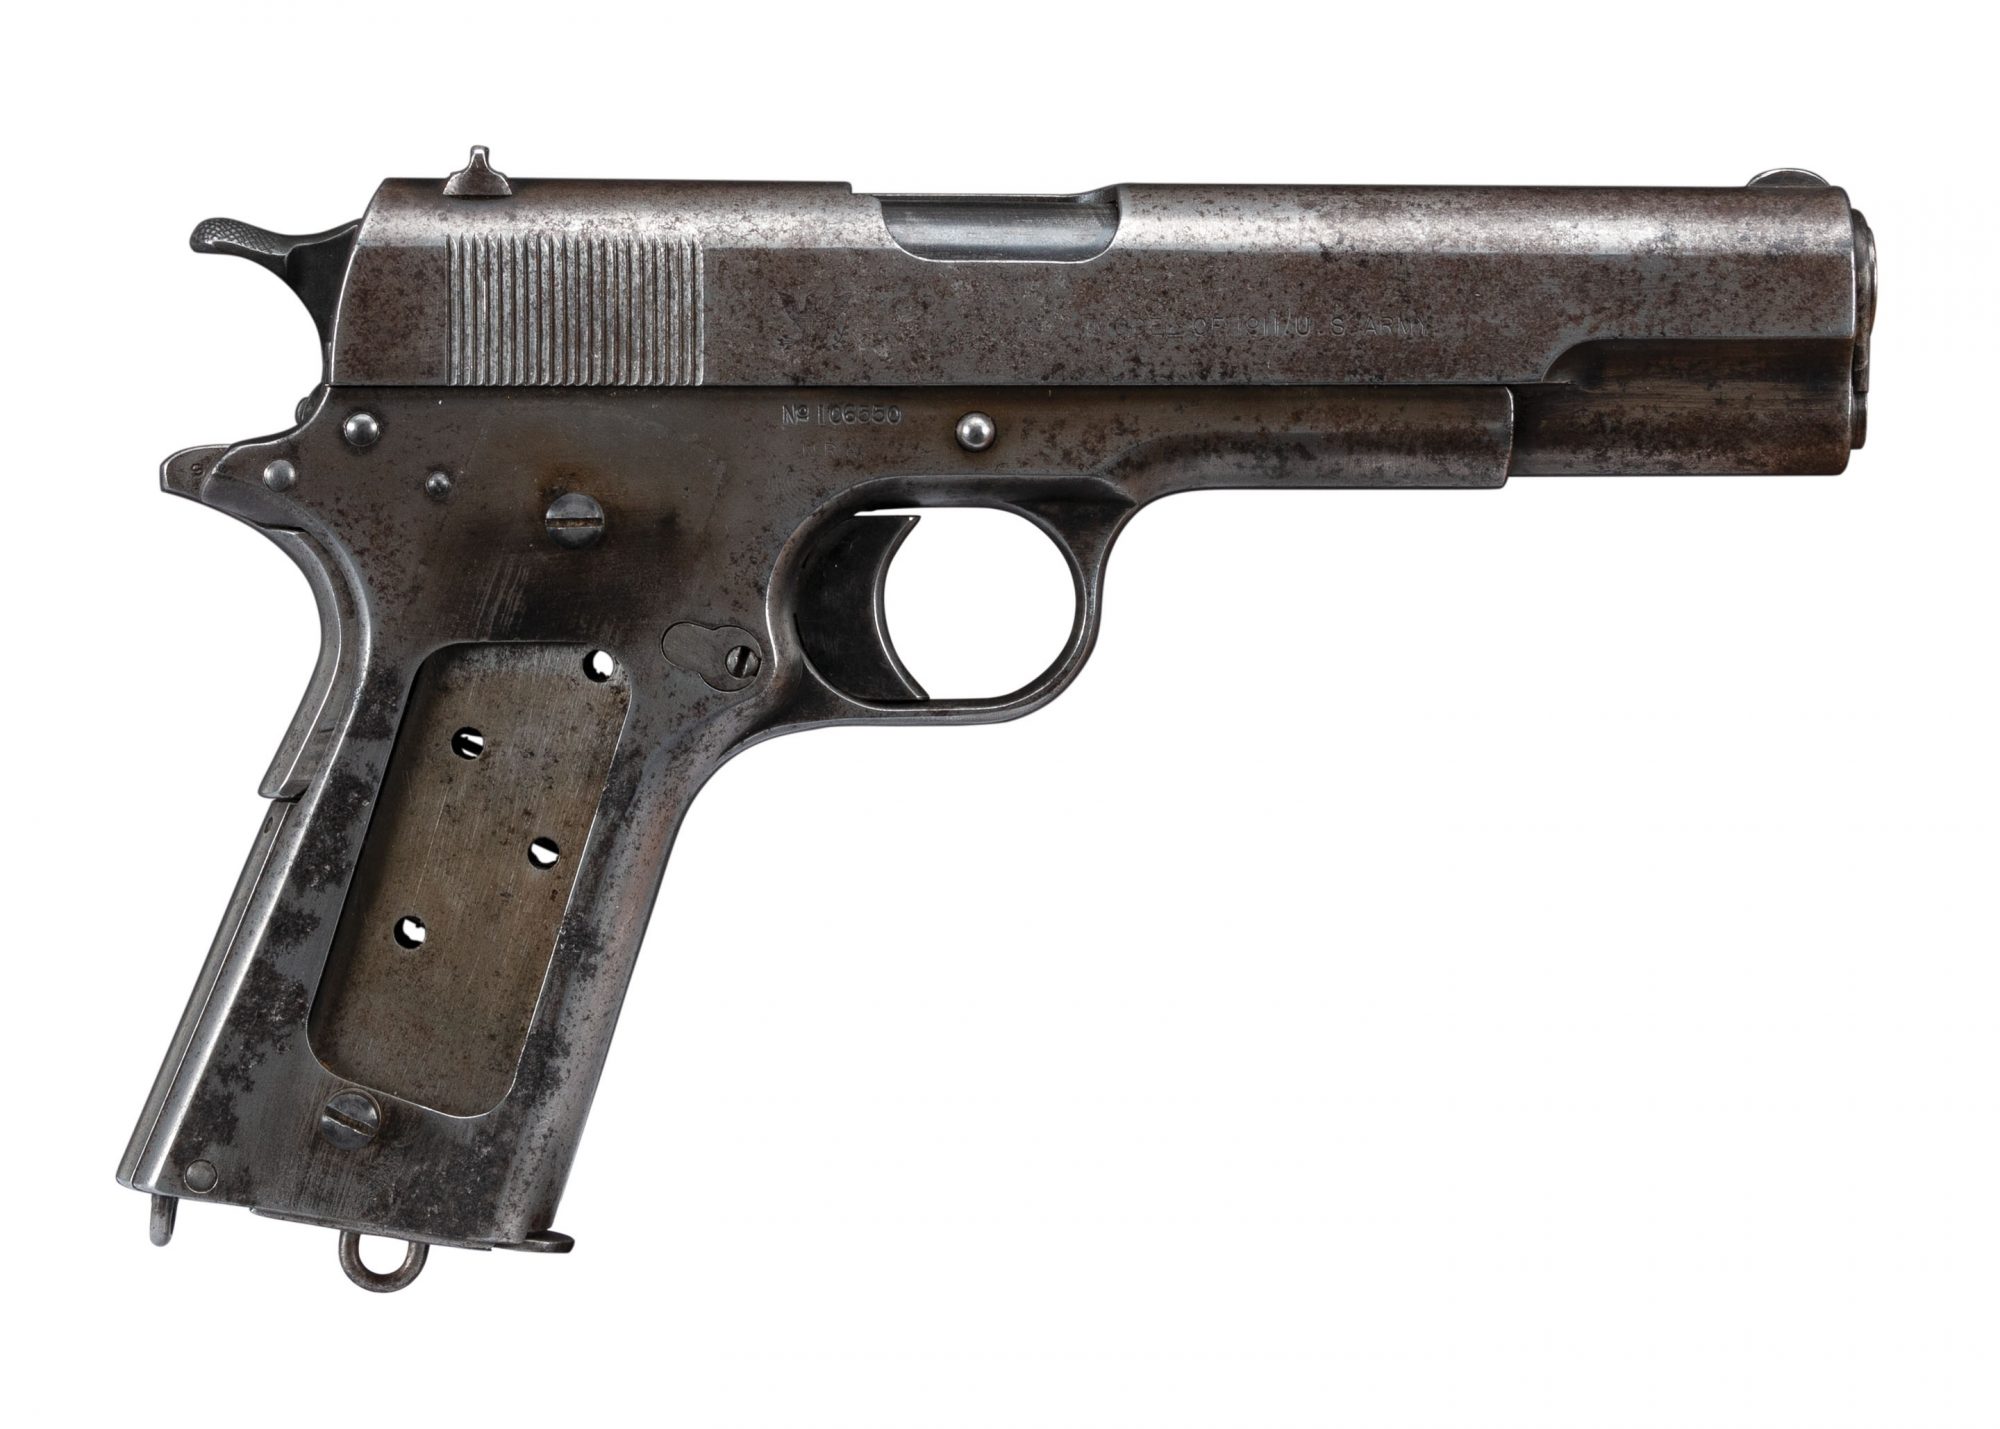 Photo of a Springfield Armory Model 1911 from 1914, before restoration work performed by Turnbull Restoration of Bloomfield, NY